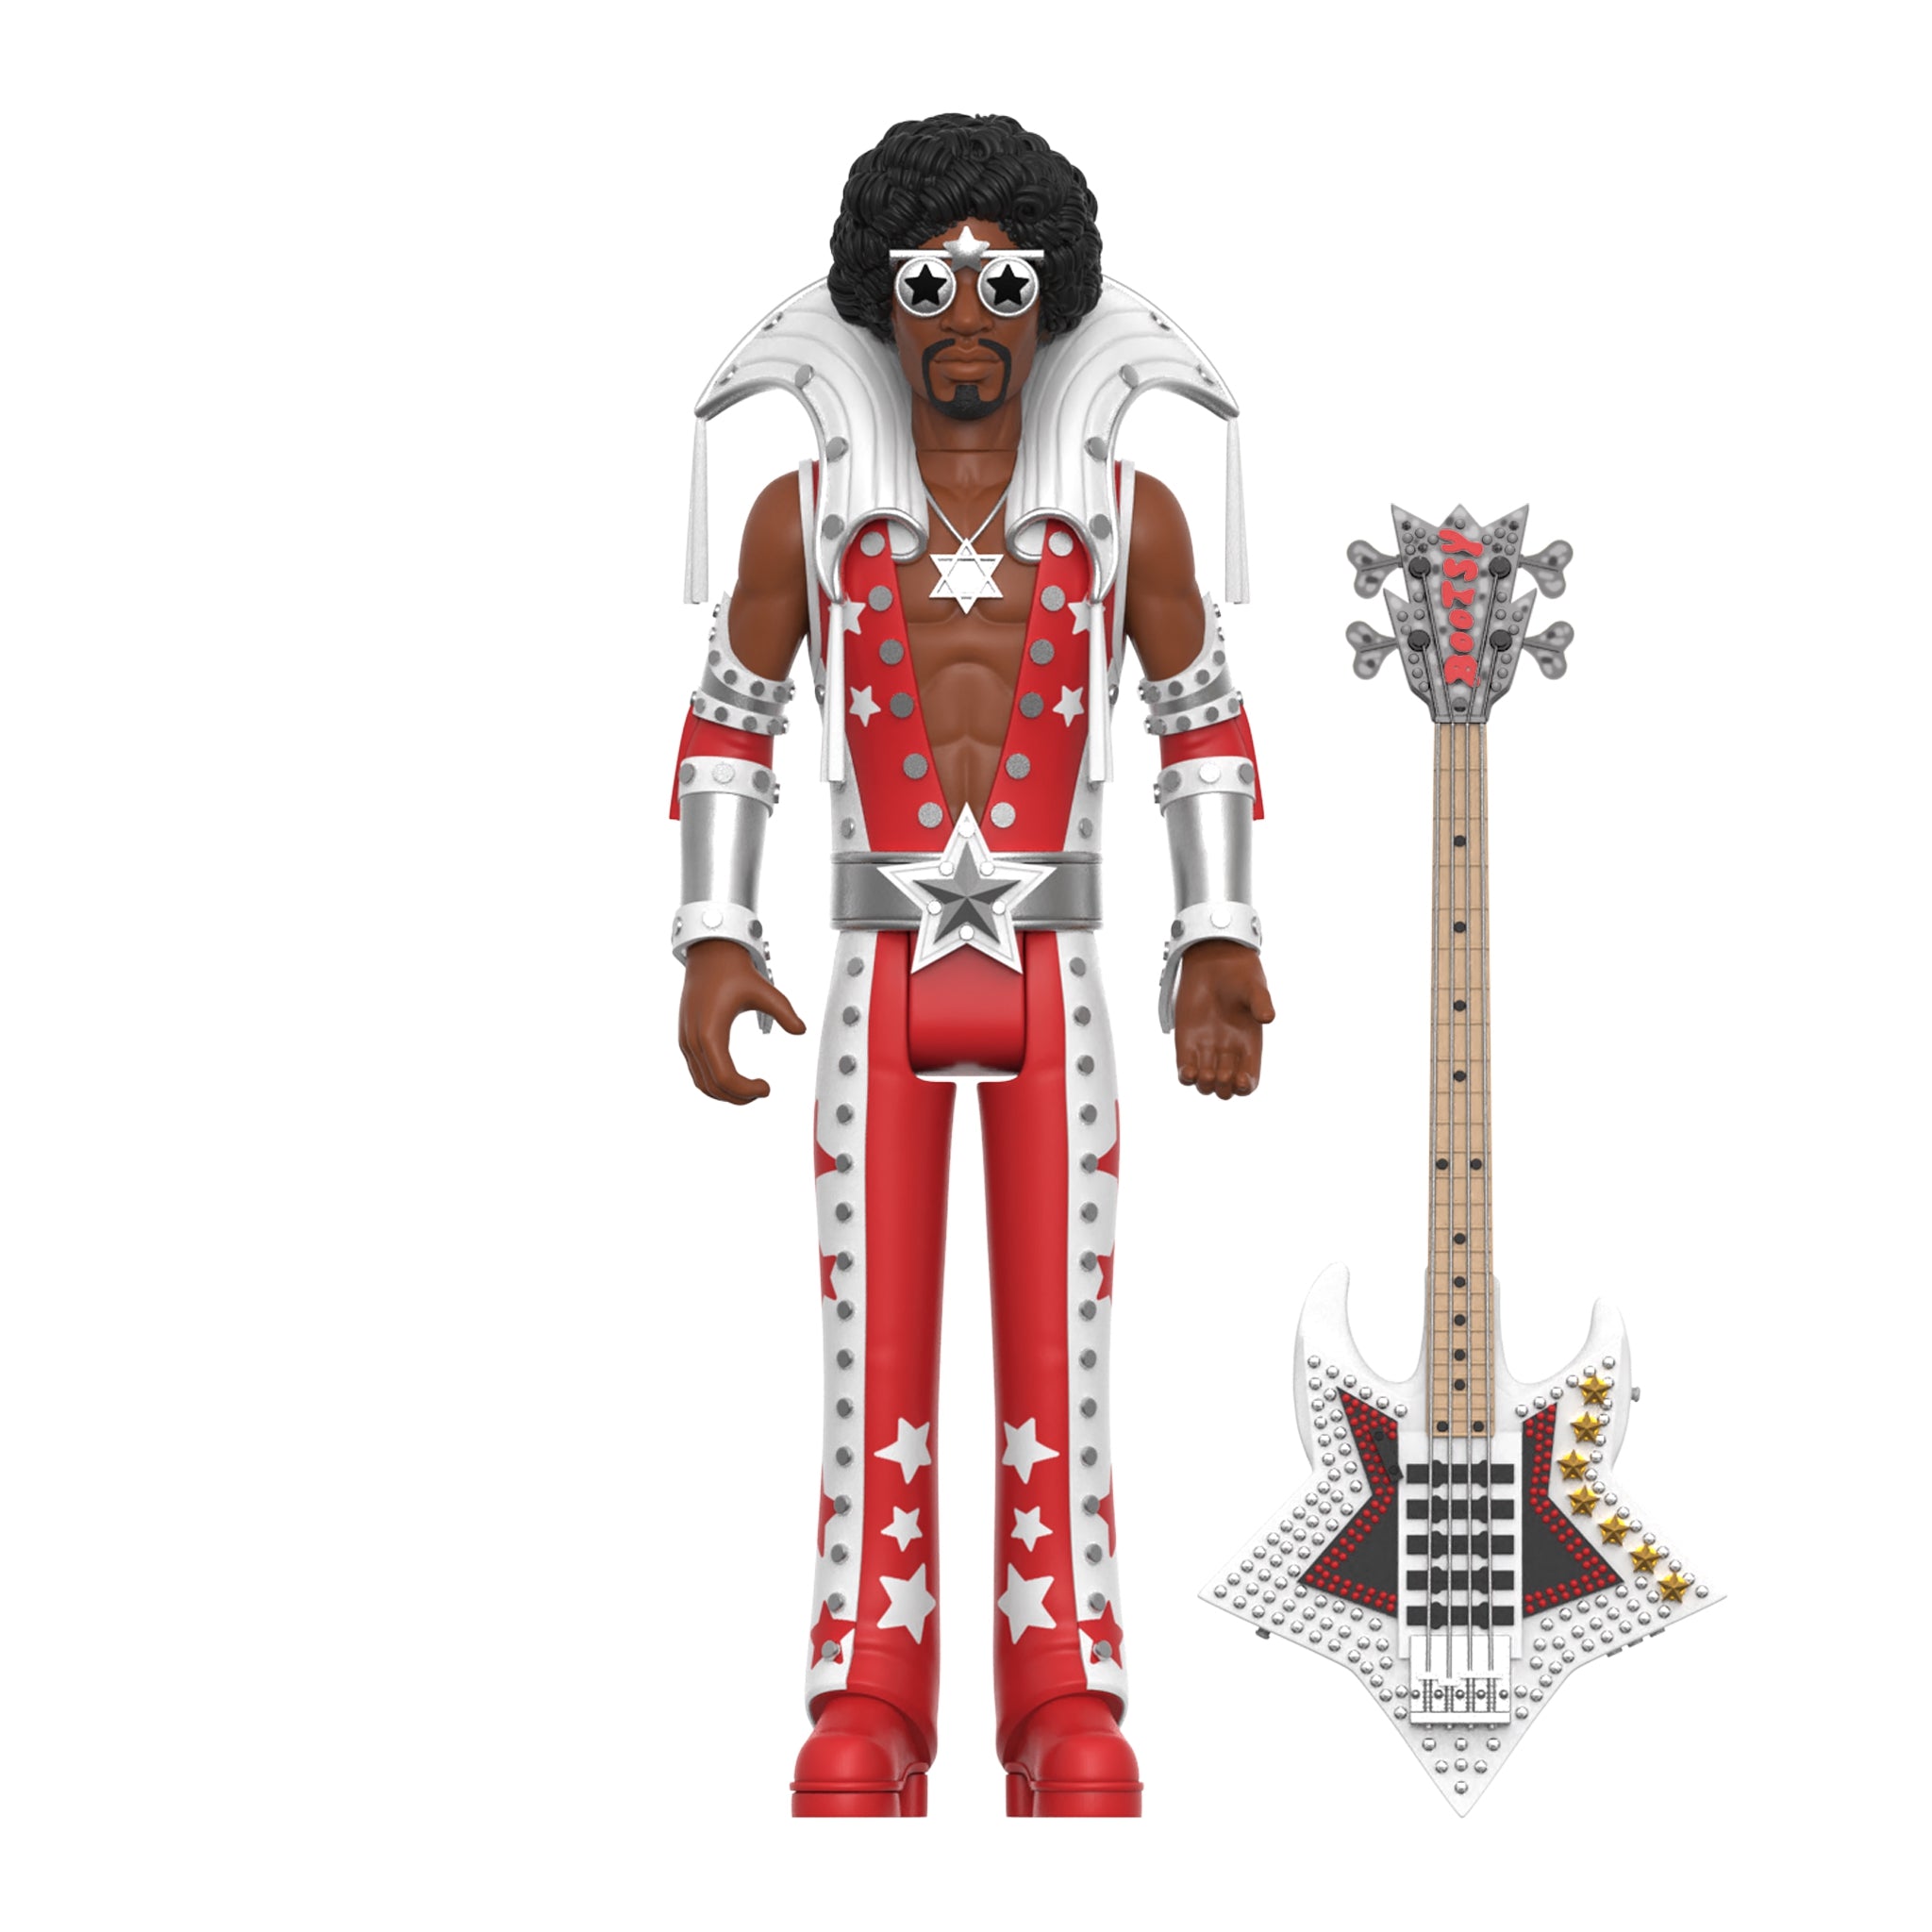 Bootsy Collins ReAction Figure - Bootsy Collins (Red and White)